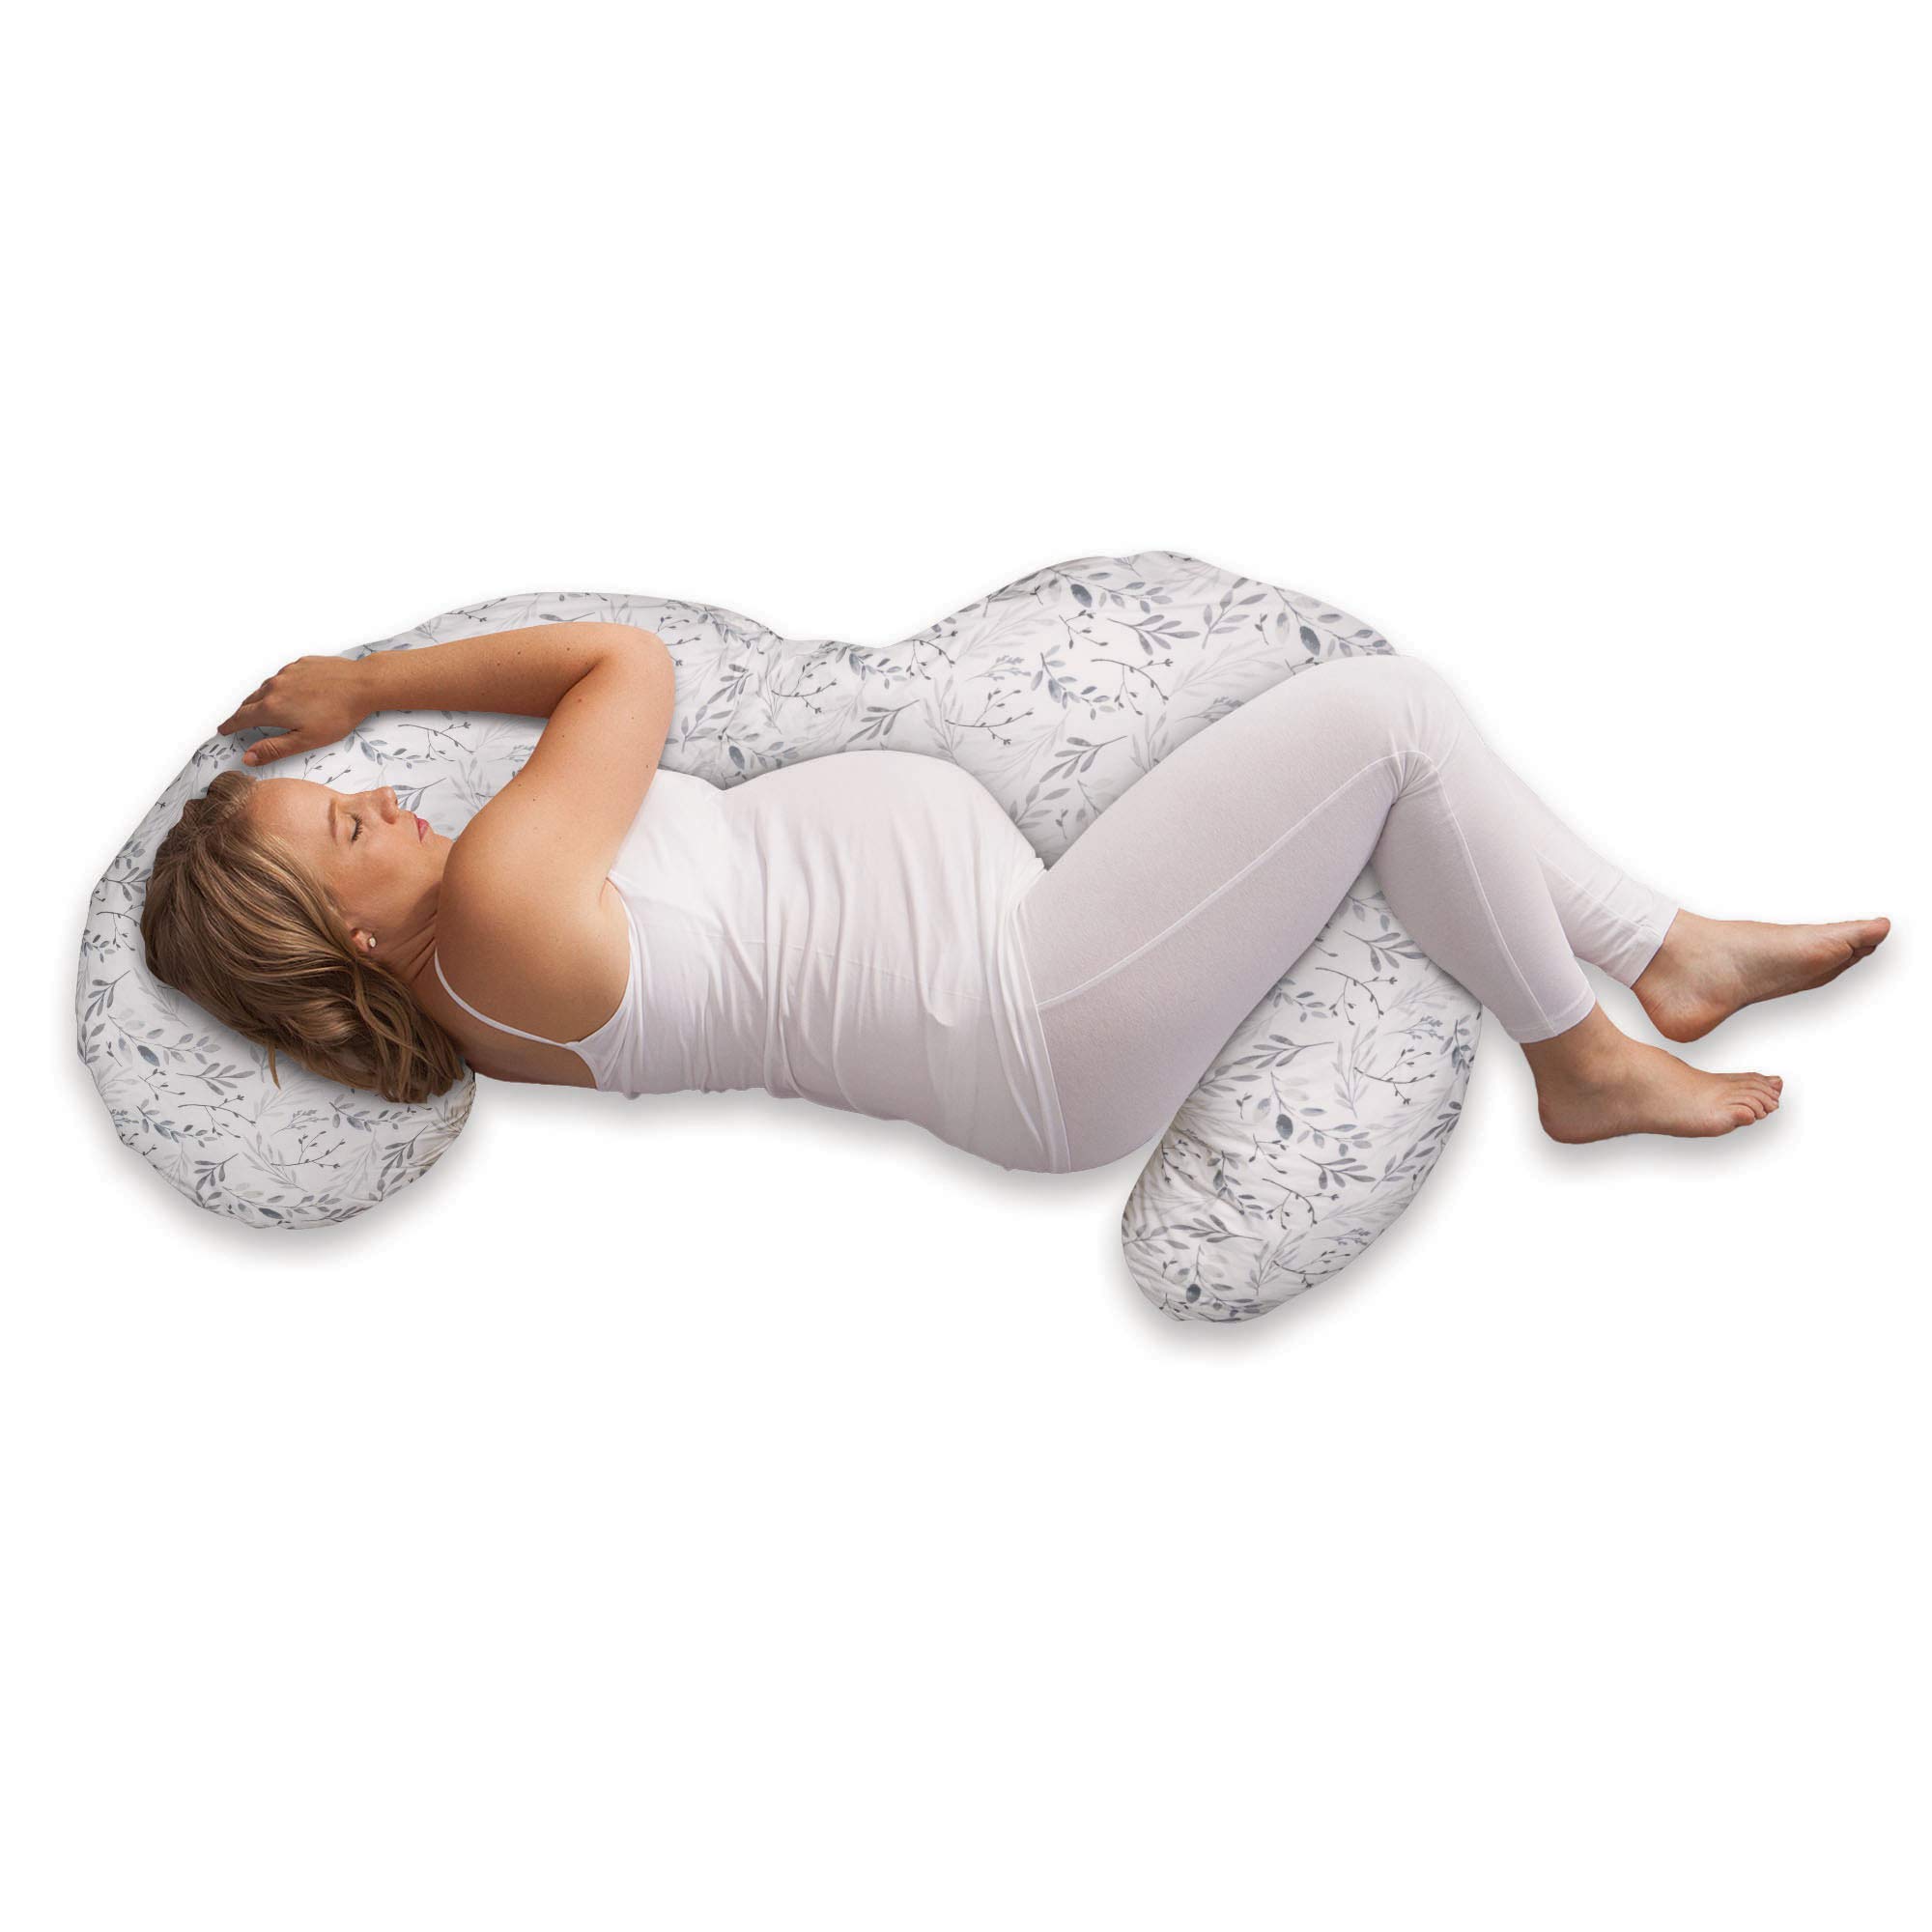 Amazon.com : Boppy Total Body Pregnancy Pillow with Removable, Breathable Pillow Cover | Gray and White Ring Toss | Plush Full-body Support | Prenatal and Postnatal Positioning : Baby